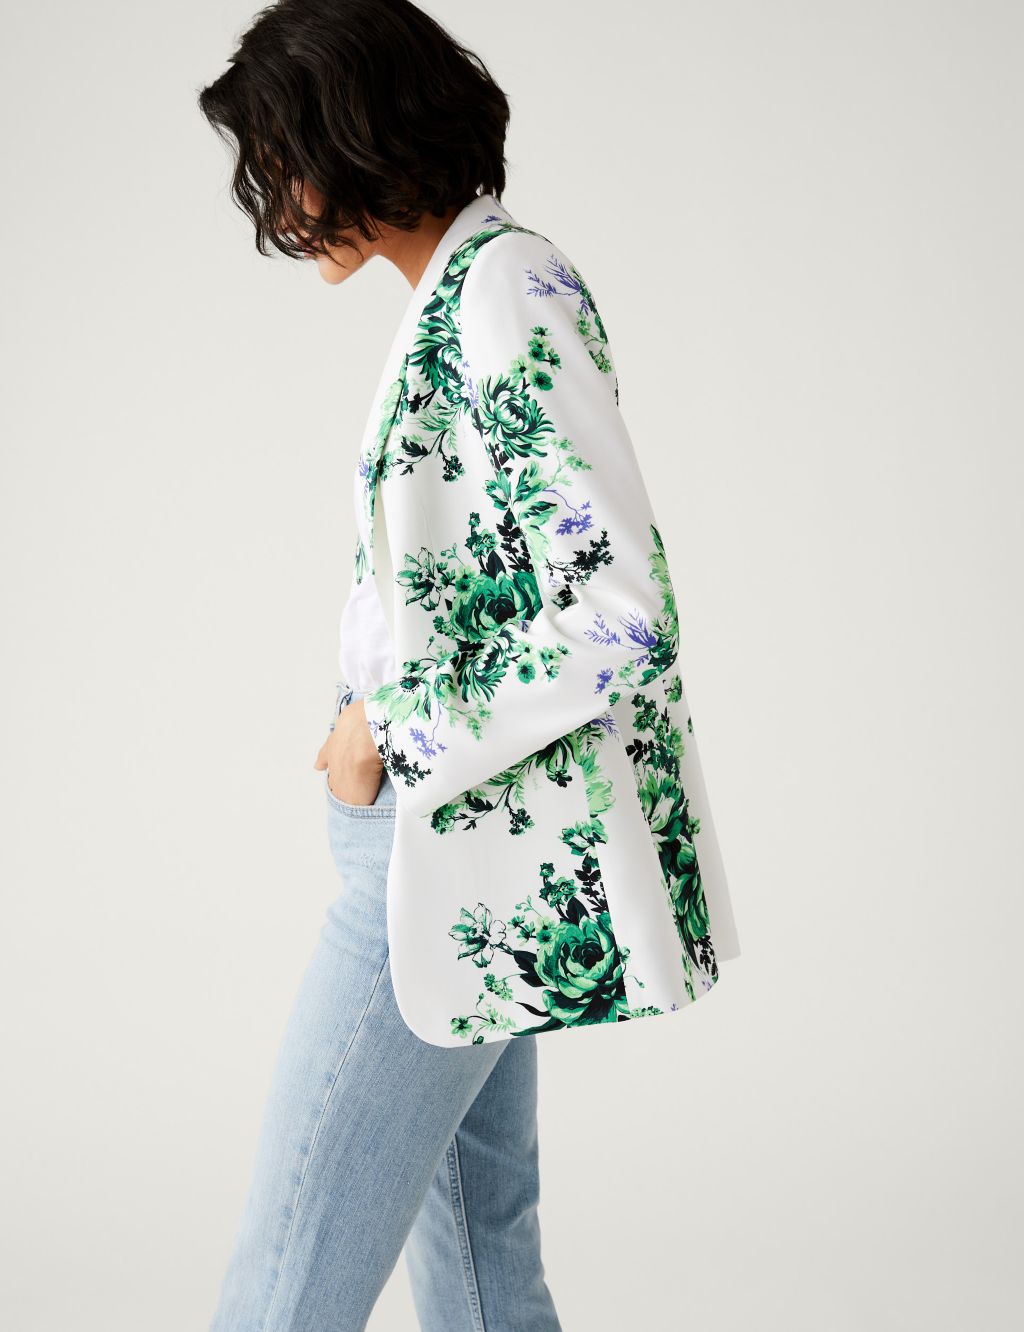 Satin Look Relaxed Floral Blazer image 3